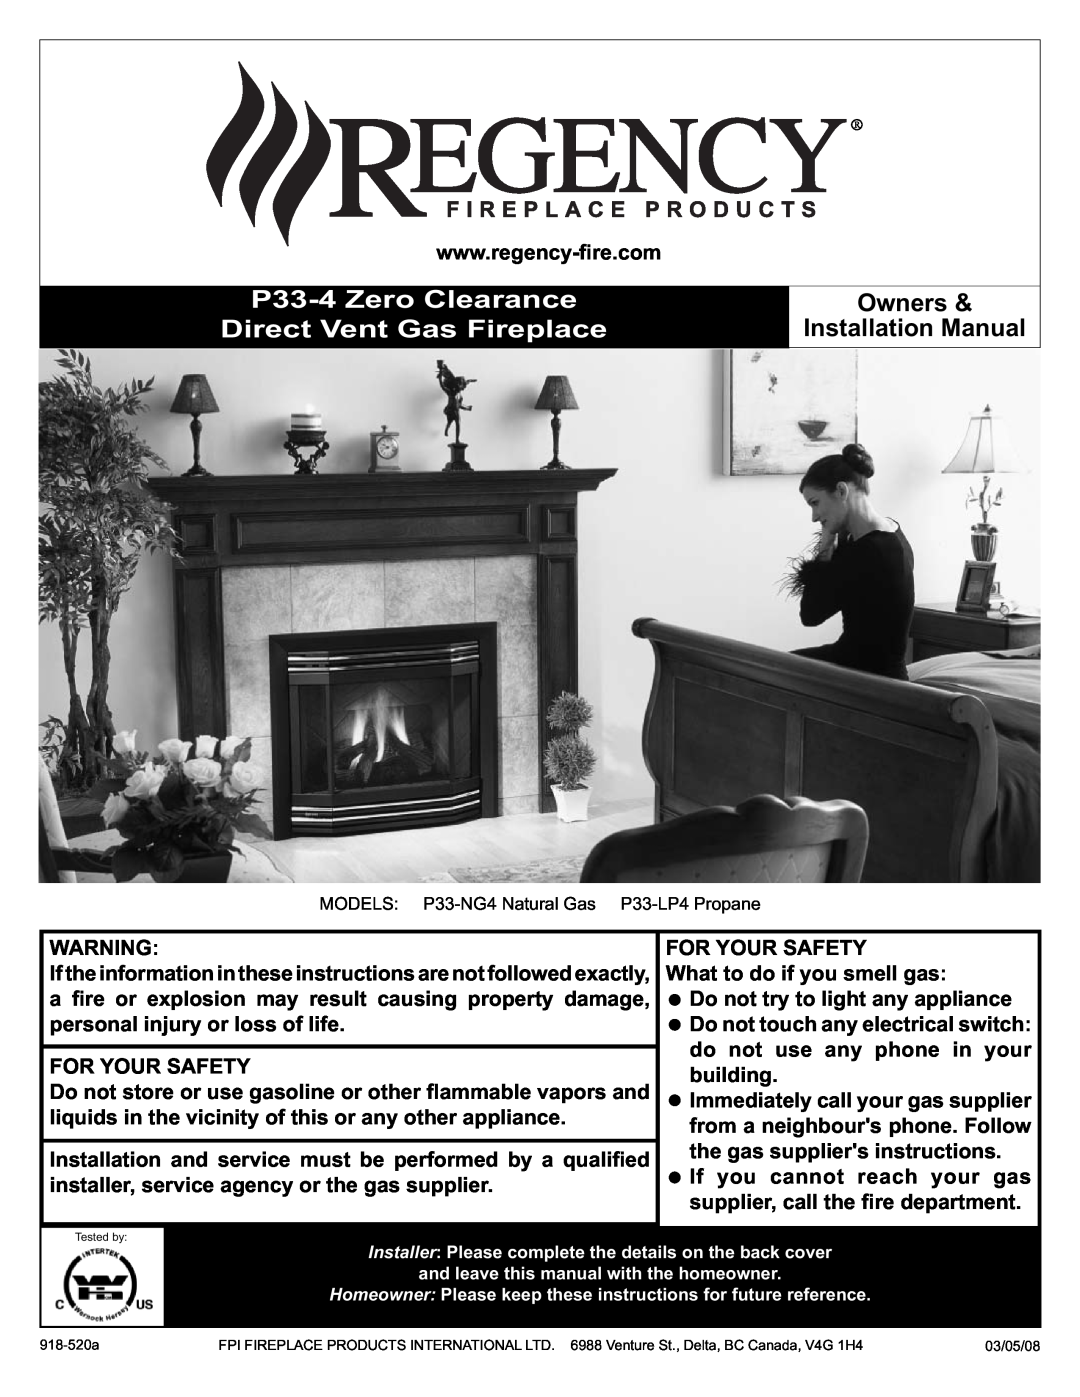 Regency P33-LP4 installation manual P33-4Zero Clearance, Direct Vent Gas Fireplace, Owners, Installation Manual 